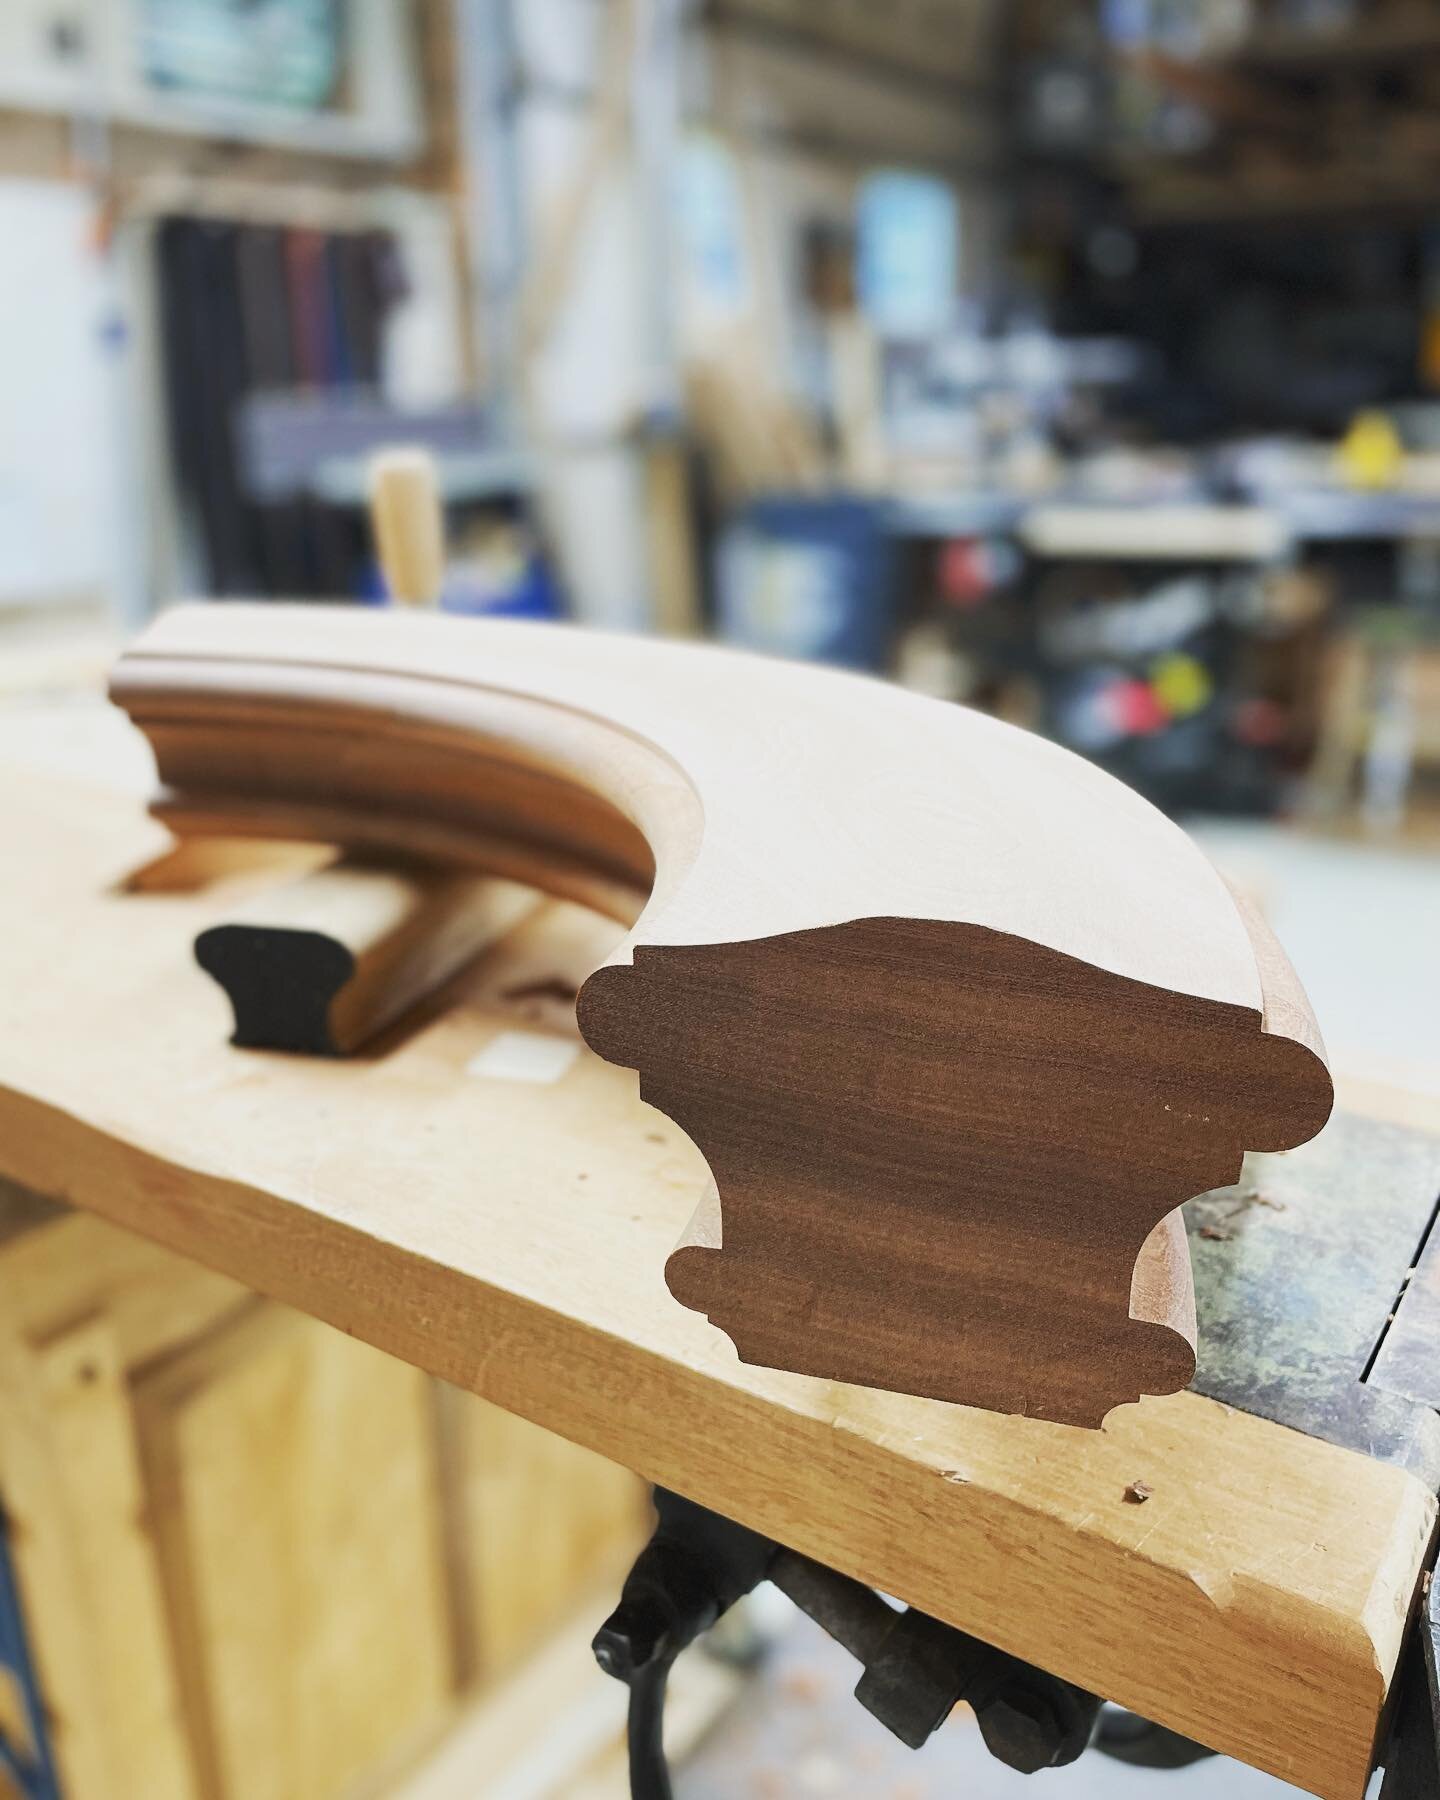 A big ol&rsquo; turn.↪️ 

Shaped and carved.

5-1/4&rdquo; x 3-7/8&rdquo; must be historic, for @hdistair 

#stair #stairbuilder #woodworking #tajimapro #mainebuilders